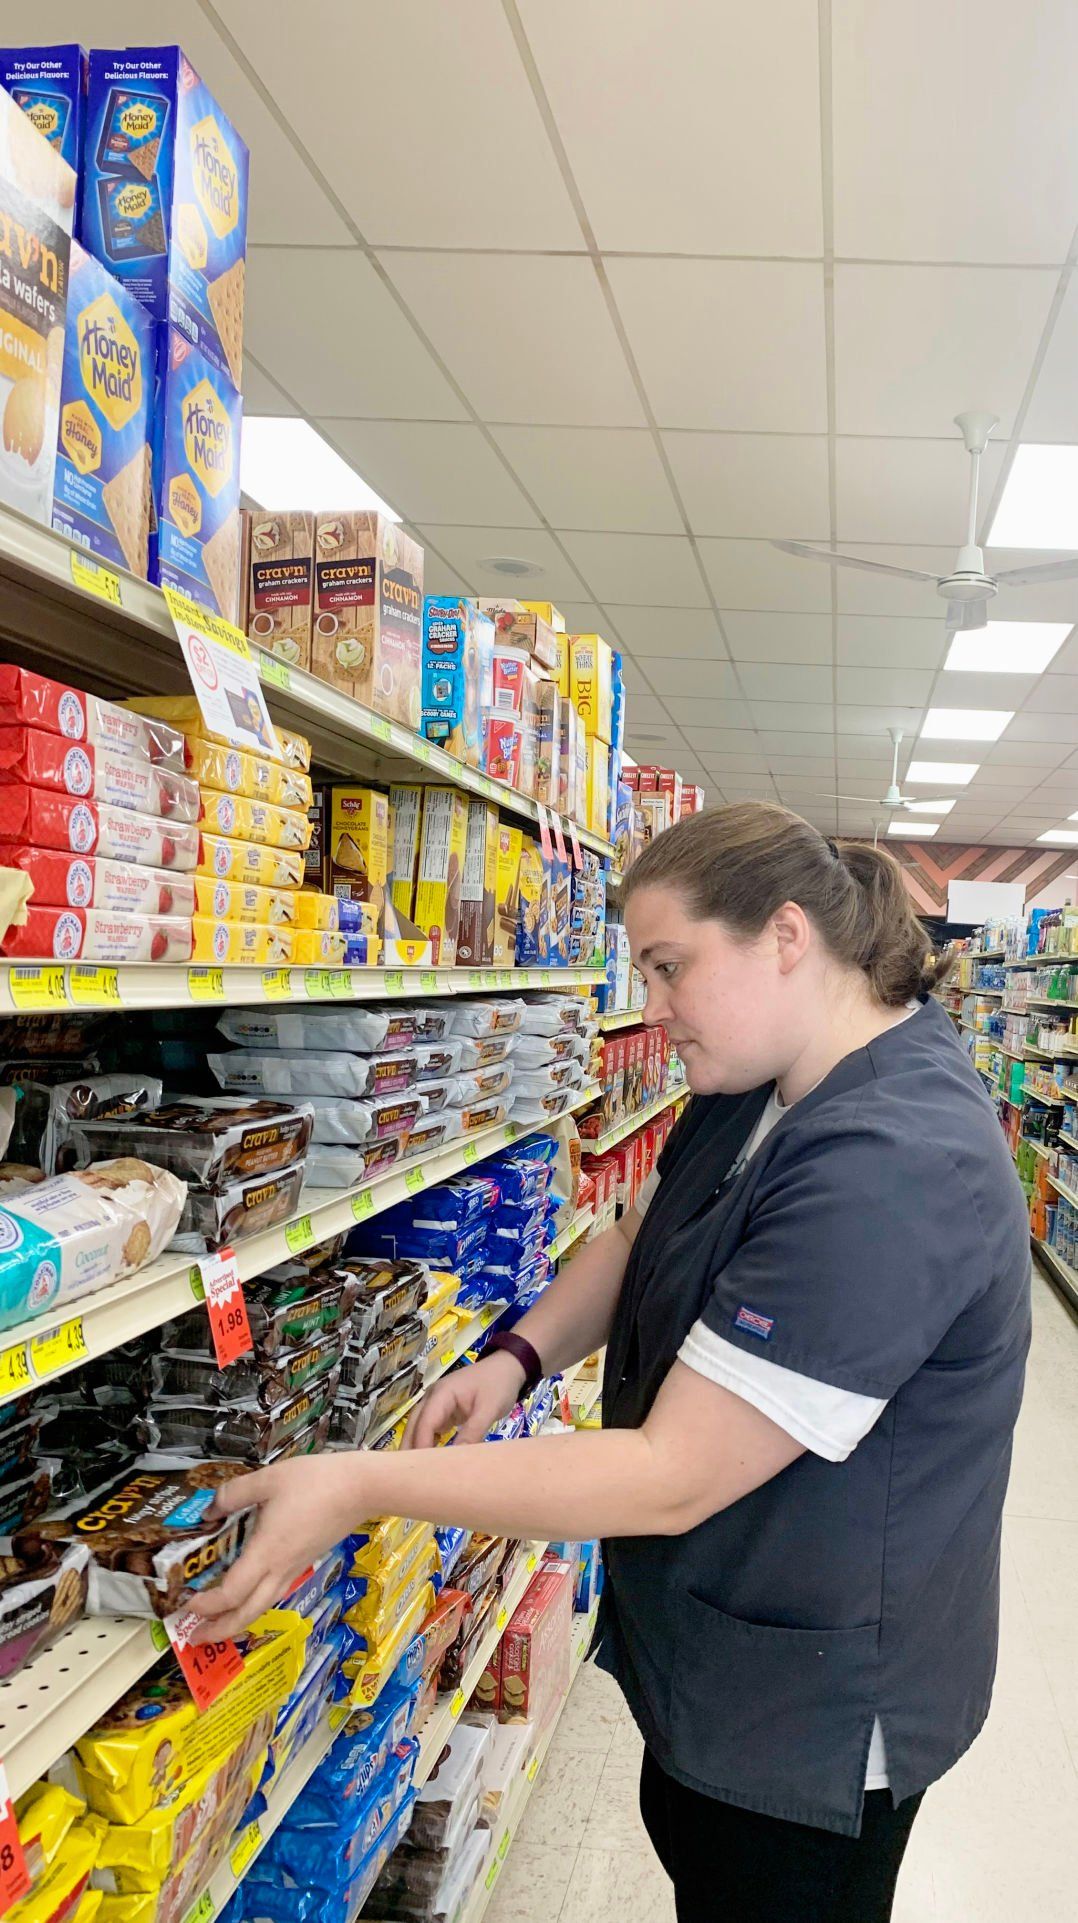 Kelicia Kelley, an employee at Okey’s Market, Cassville, Wis., straightens items on a shelf at the store. The store was established in 1933 in the Grant County community.    PHOTO CREDIT: Erik Hogstrom